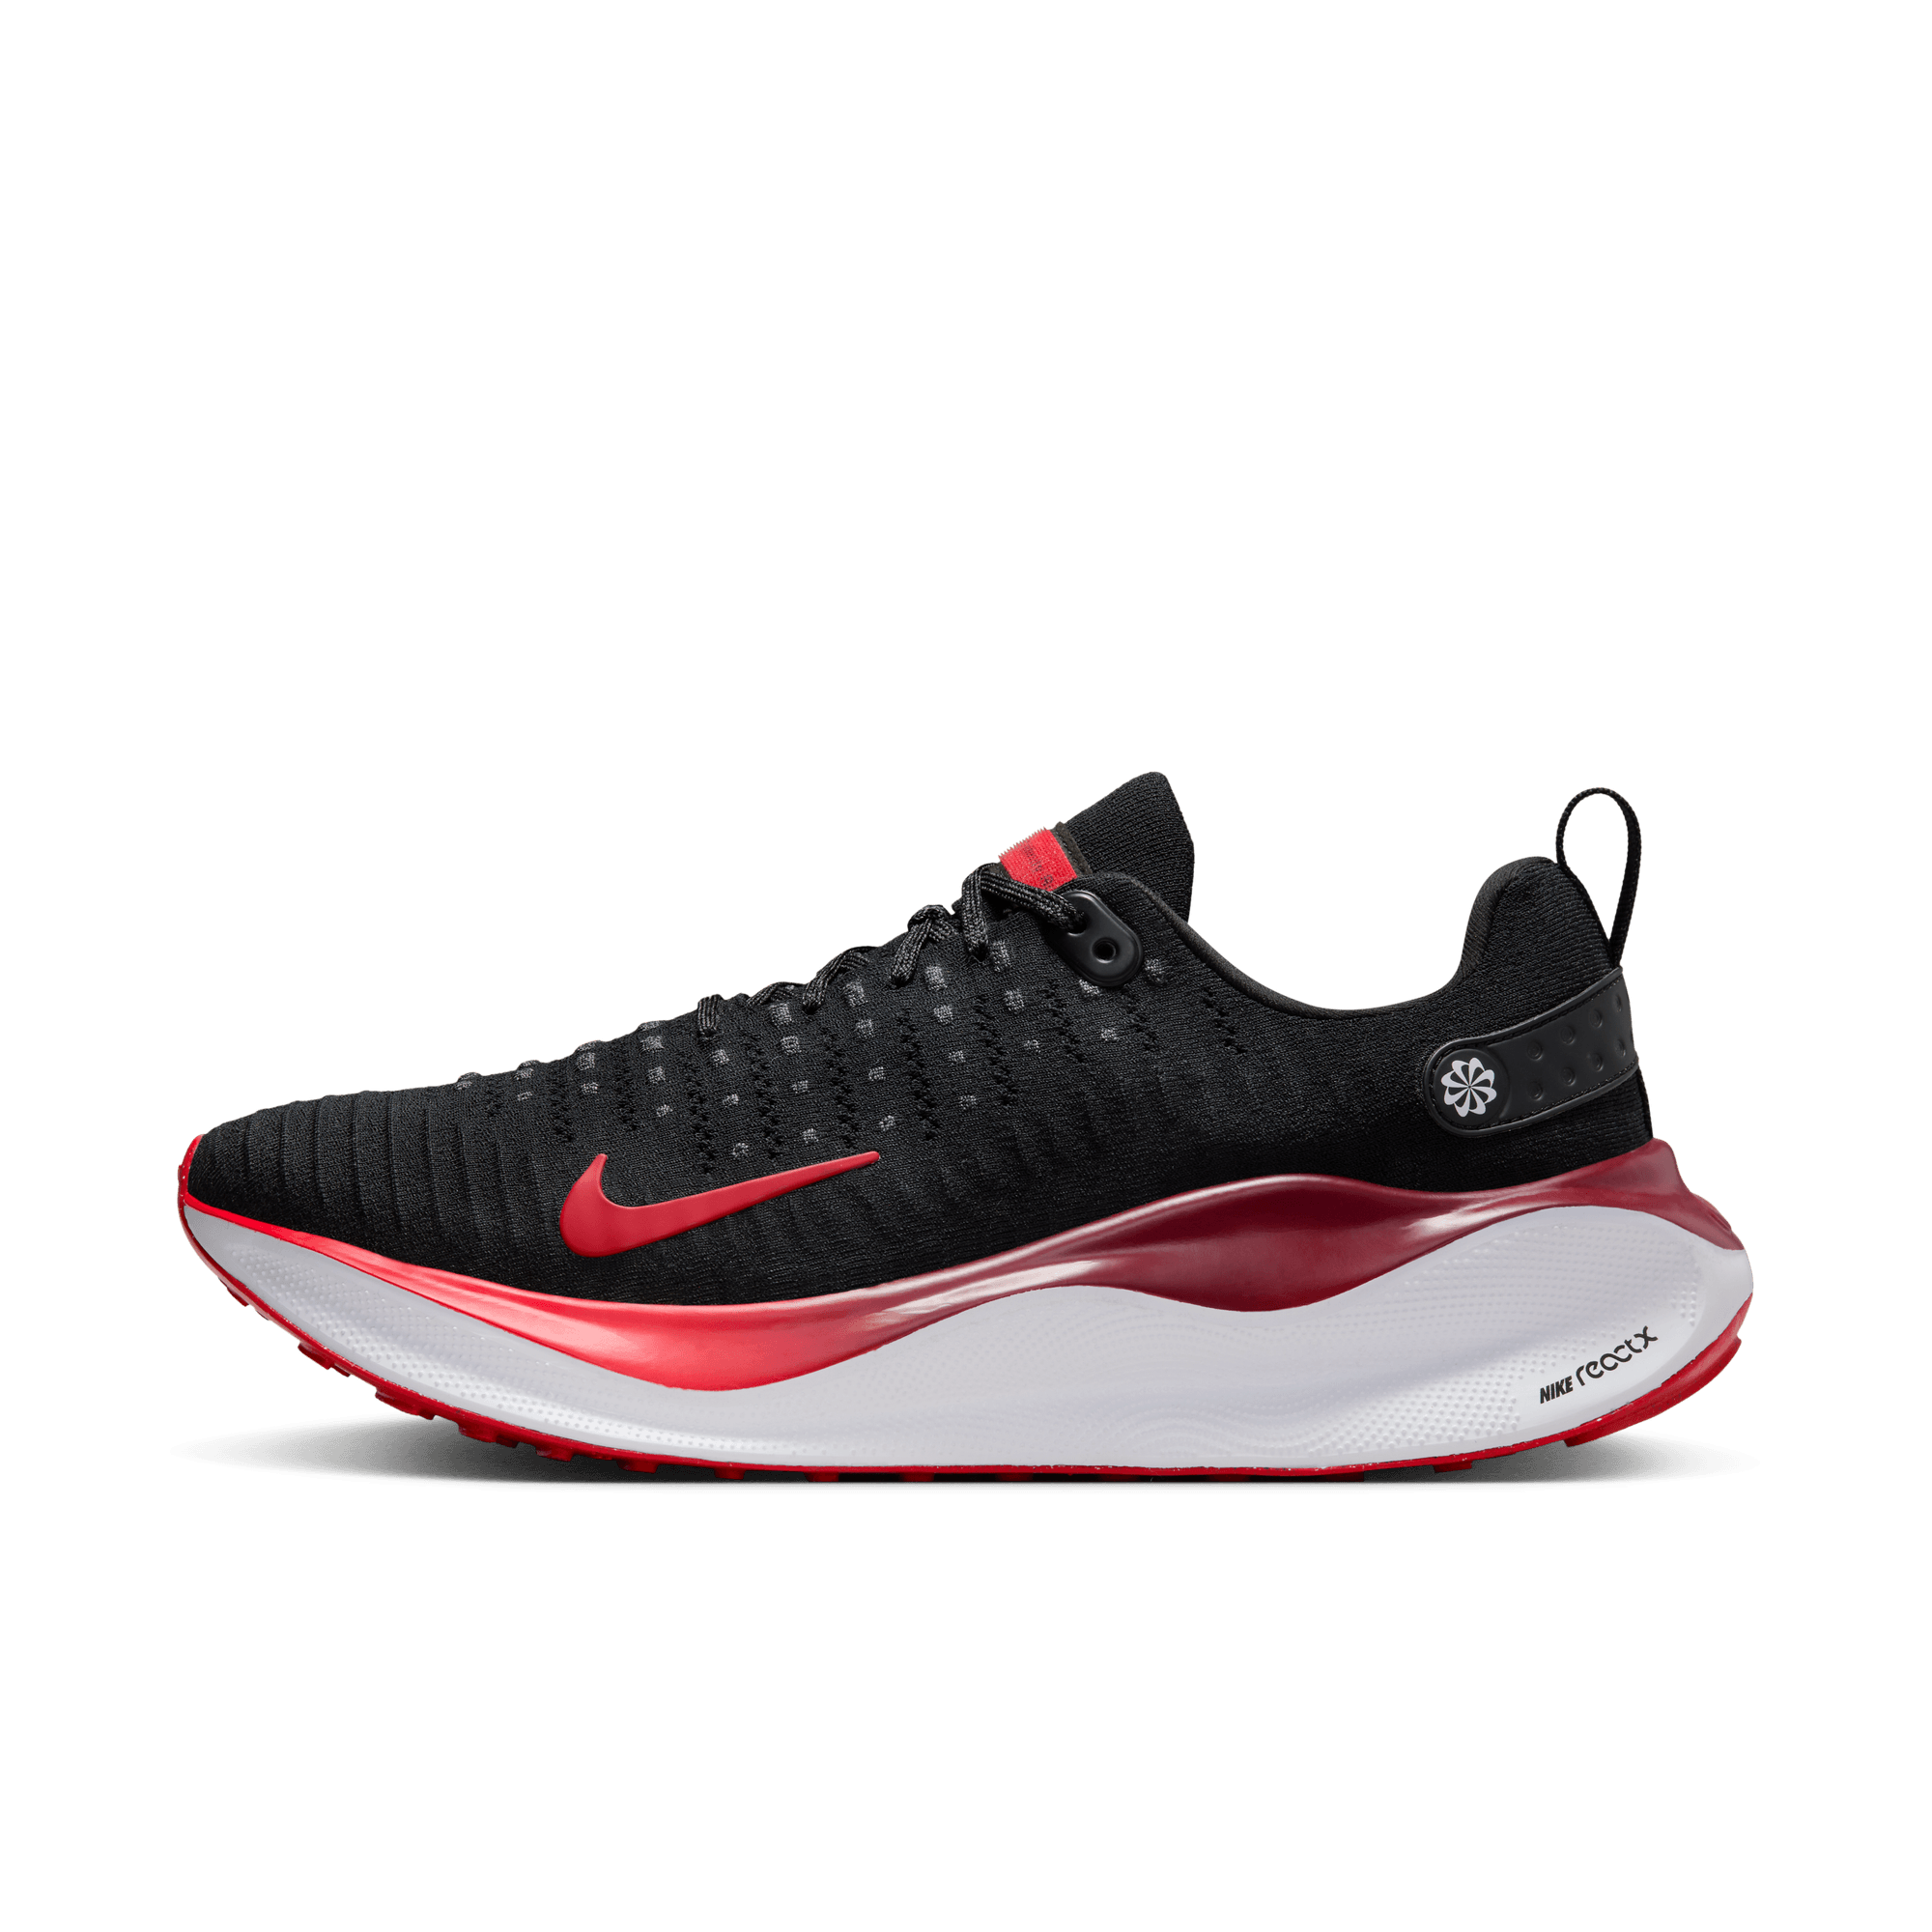 NIKE INFINITY RUN 4 MEN'S ROAD RUNNING SHOES (EXTRA WIDE)